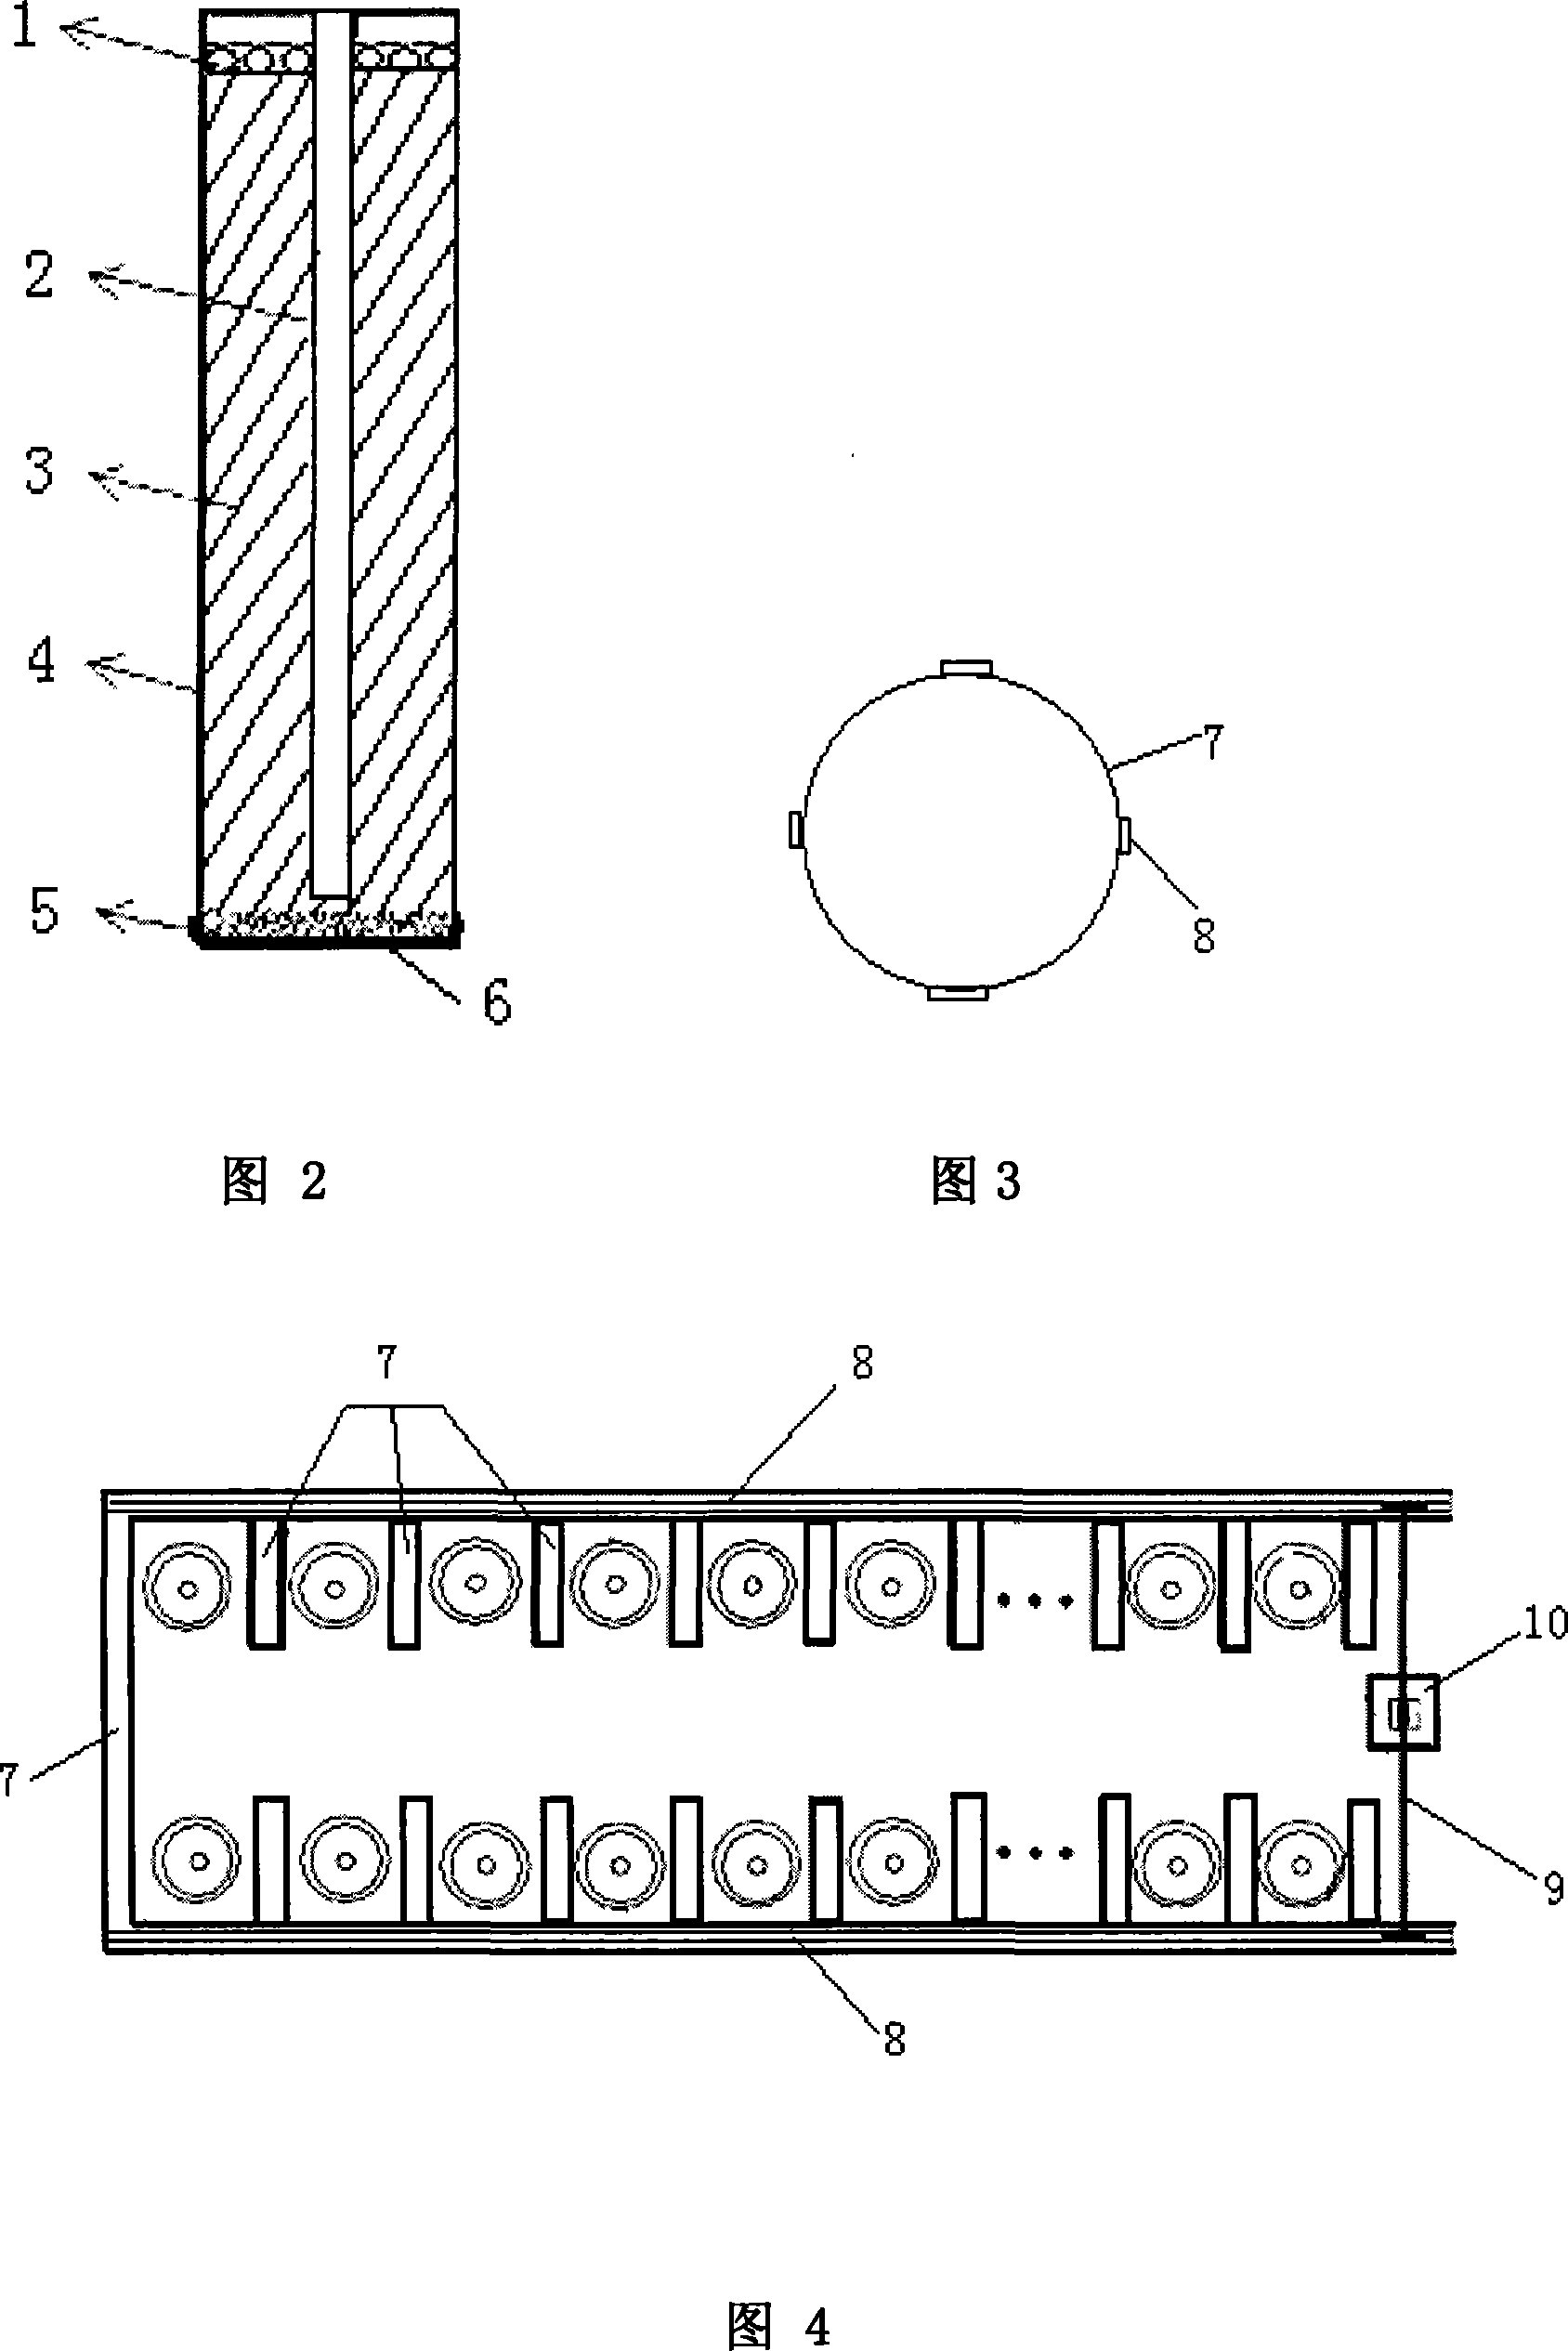 Method for determining the process of root system of plant absorbing soil moisture